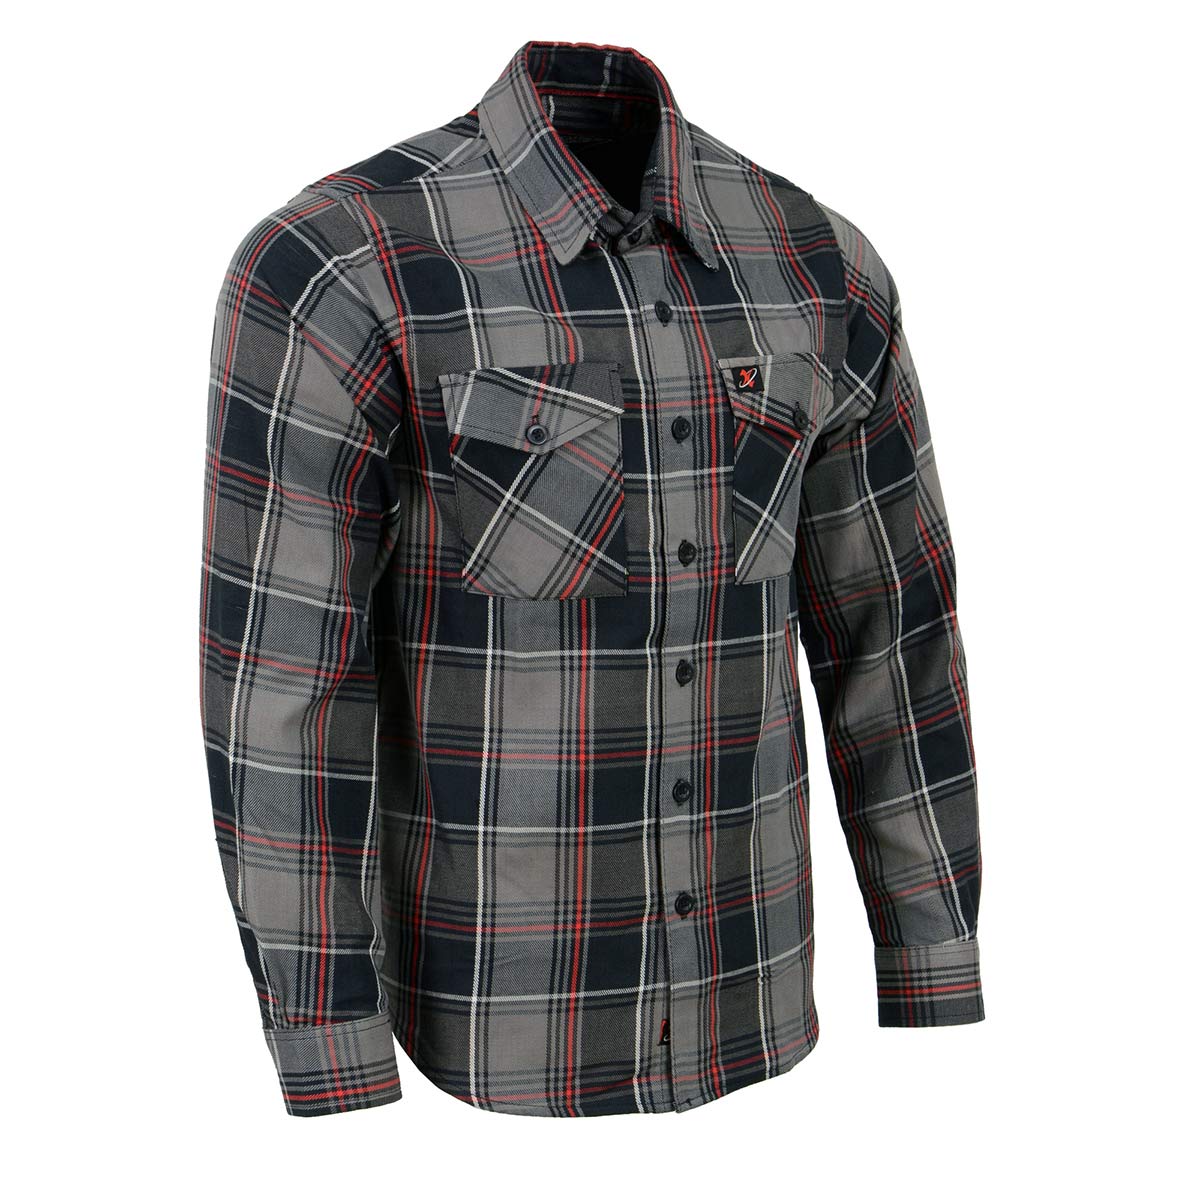 Men's Black and Grey with Red Long Sleeve Cotton Flannel Shirt